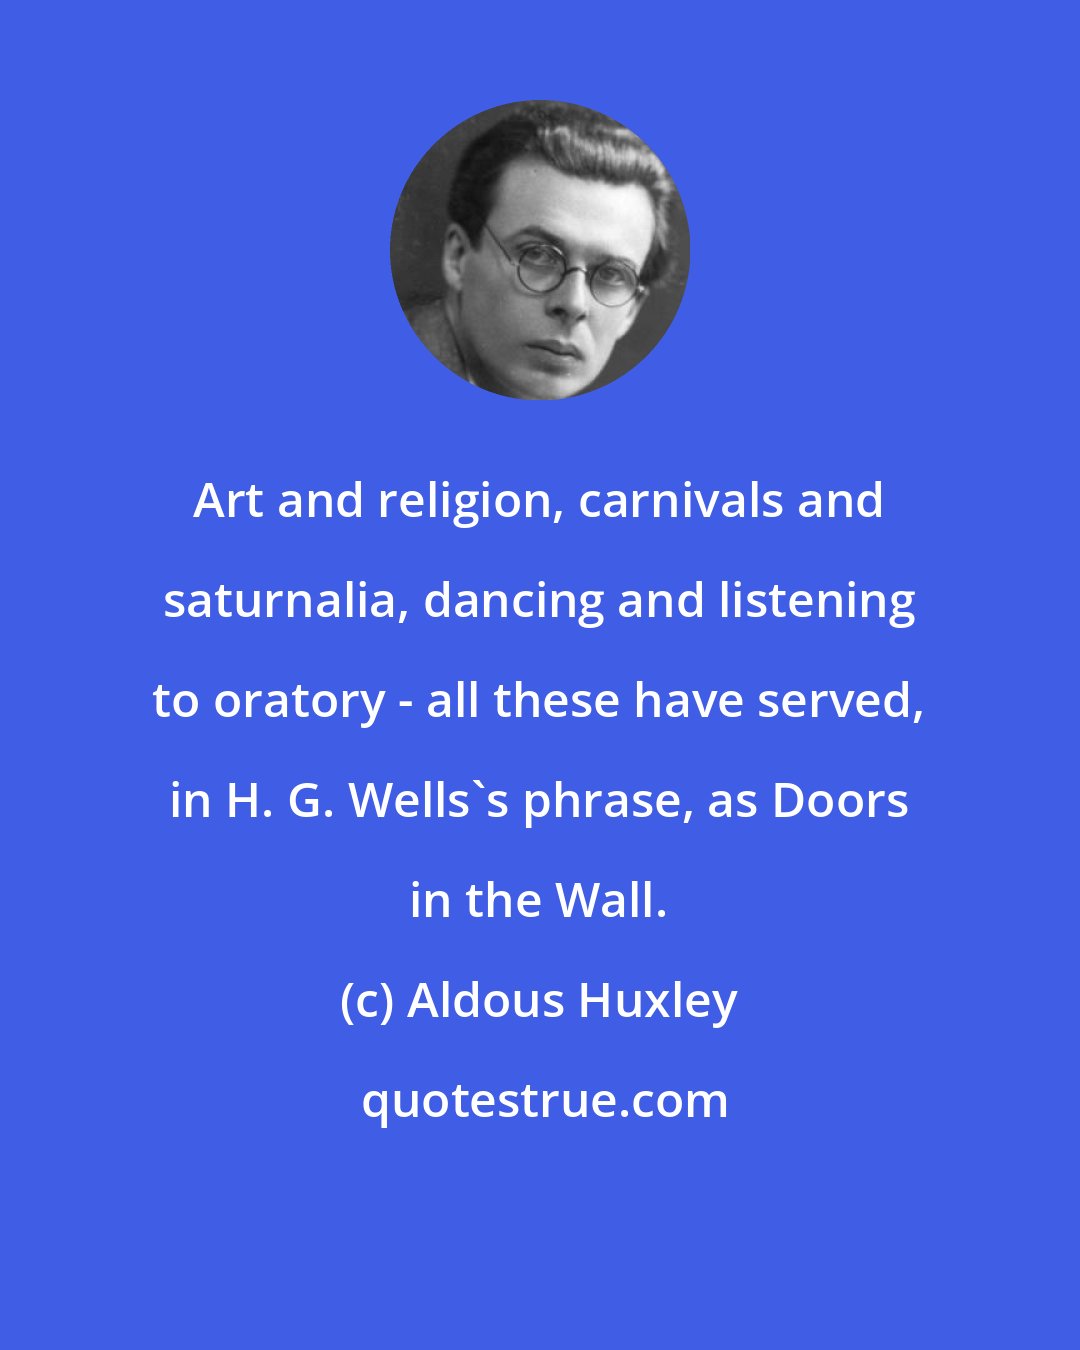 Aldous Huxley: Art and religion, carnivals and saturnalia, dancing and listening to oratory - all these have served, in H. G. Wells's phrase, as Doors in the Wall.